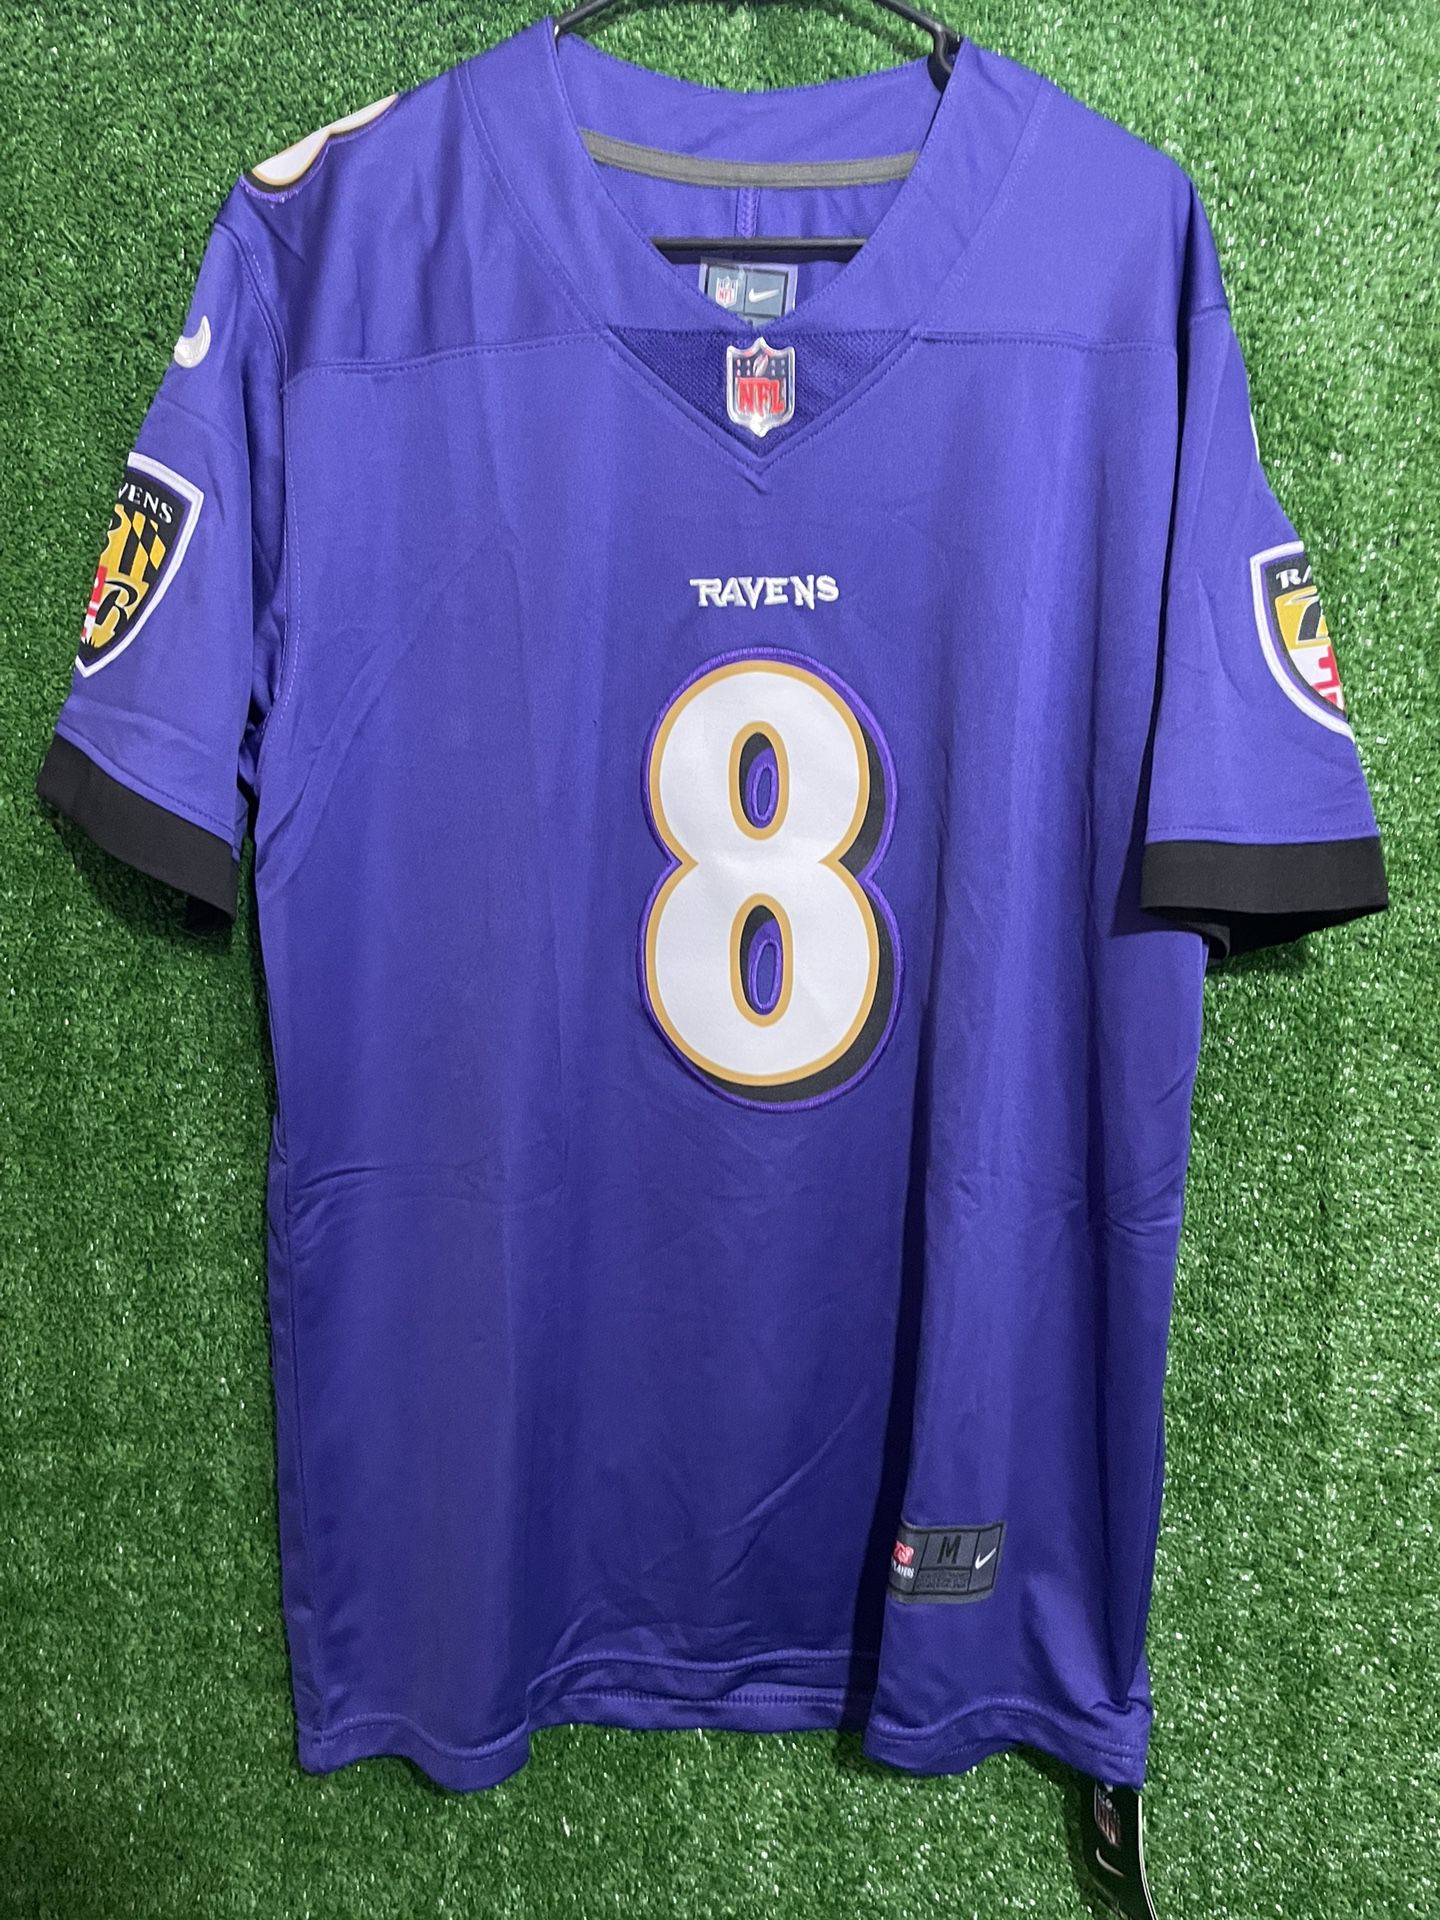 LAMAR JACKSON BALTIMORE RAVENS NIKE JERSEY BRAND NEW WITH TAGS SIZES MEDIUM, LARGE AND XL AVAILABLE